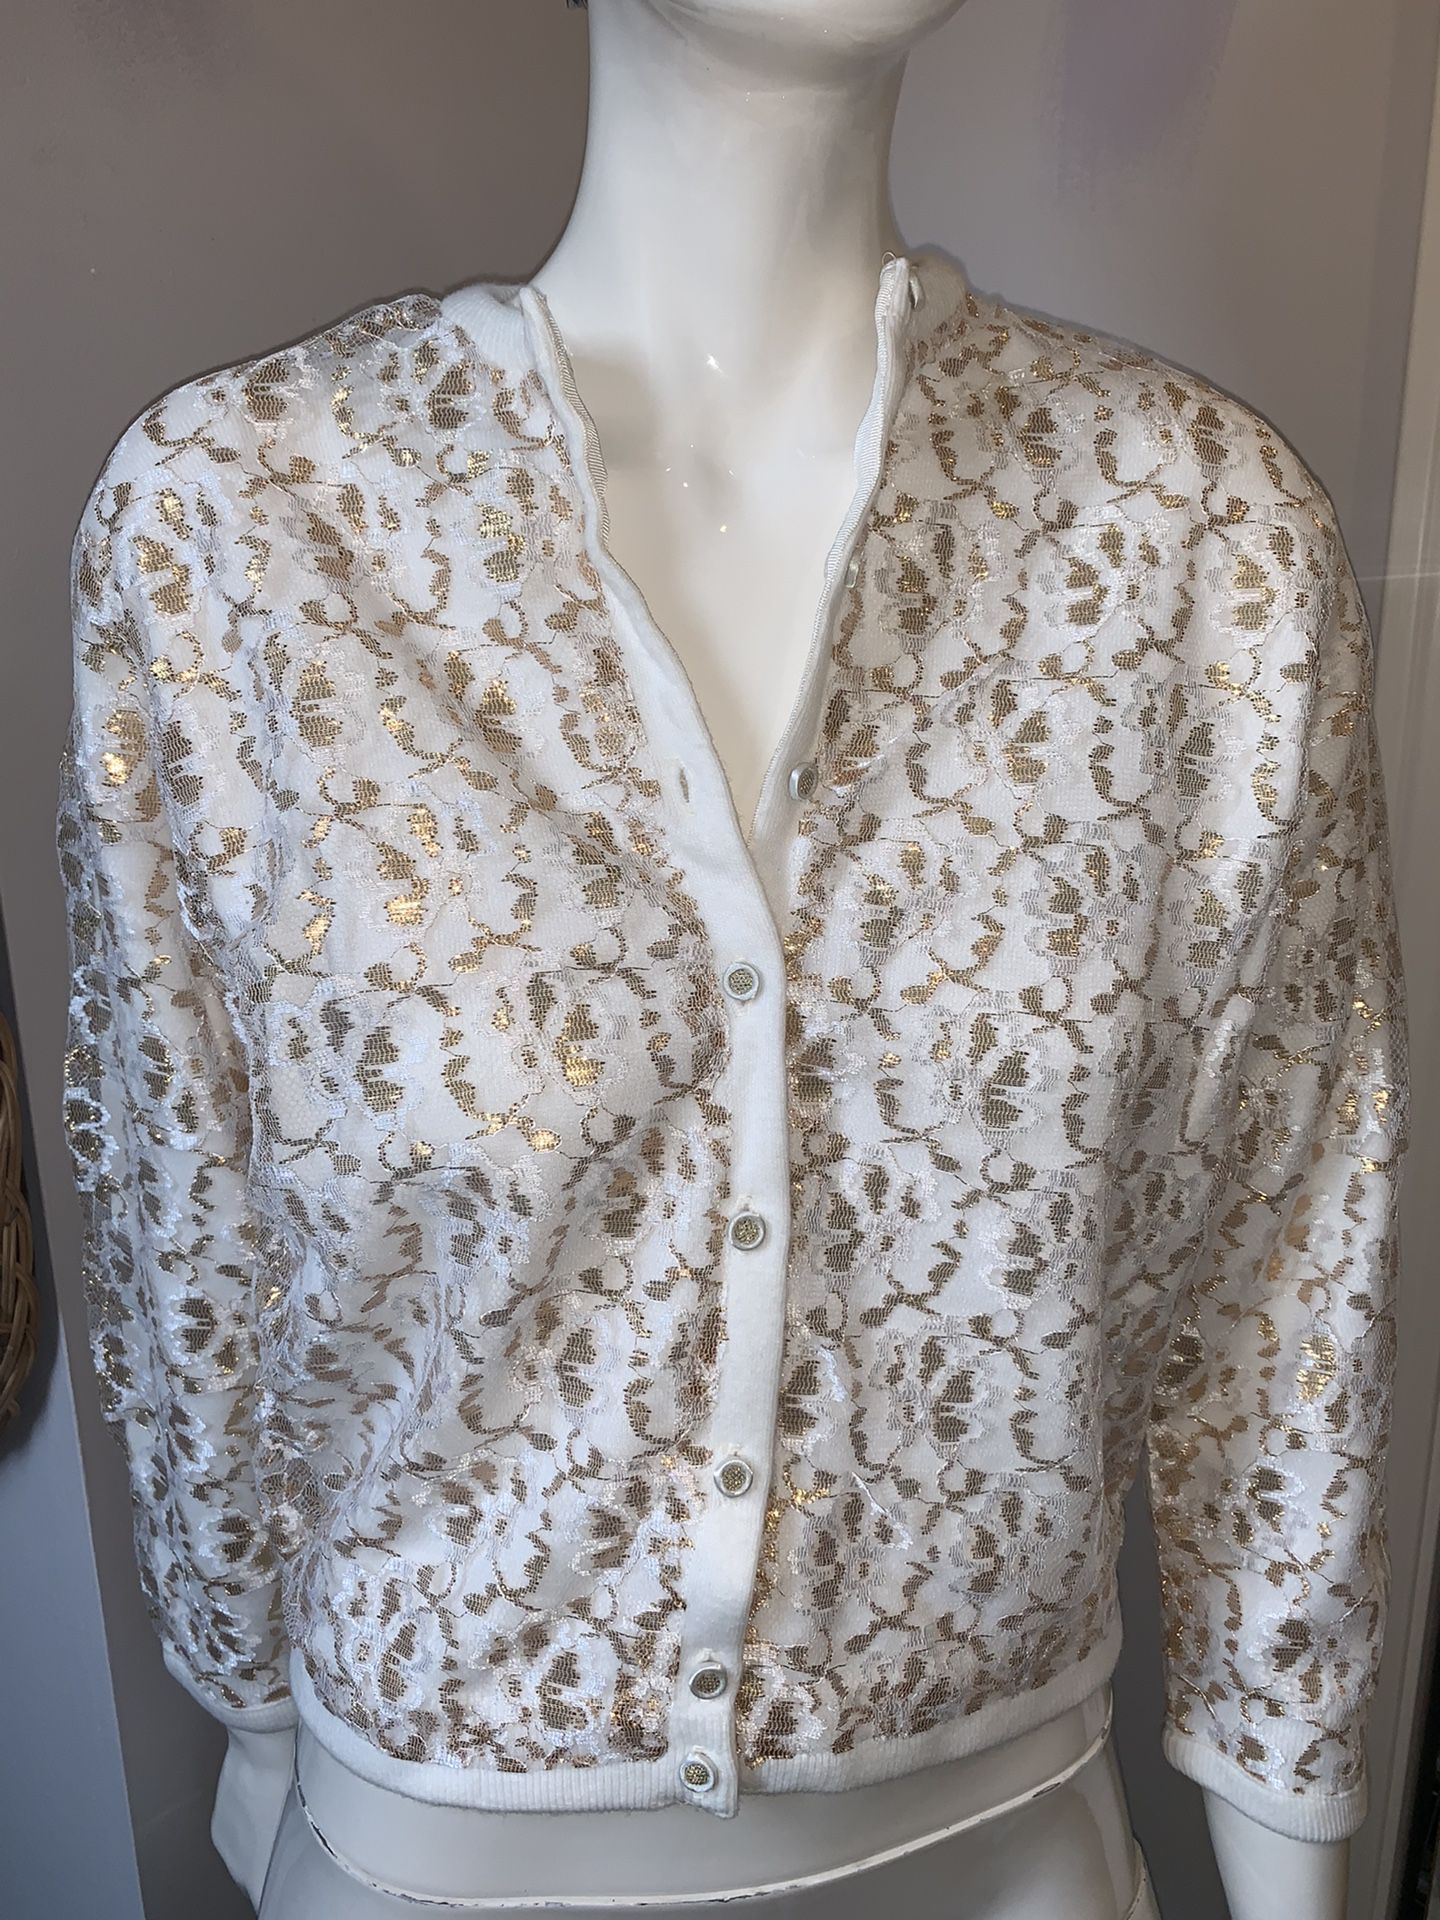 LADIES GOLD & WHITE LACE CARDIGAN ORLON ACRYLIC by PARK STORYK “ OPEN BOX UNUSED “ SEE ALL PICTURES “ PROTECTIVE SEALED BAG